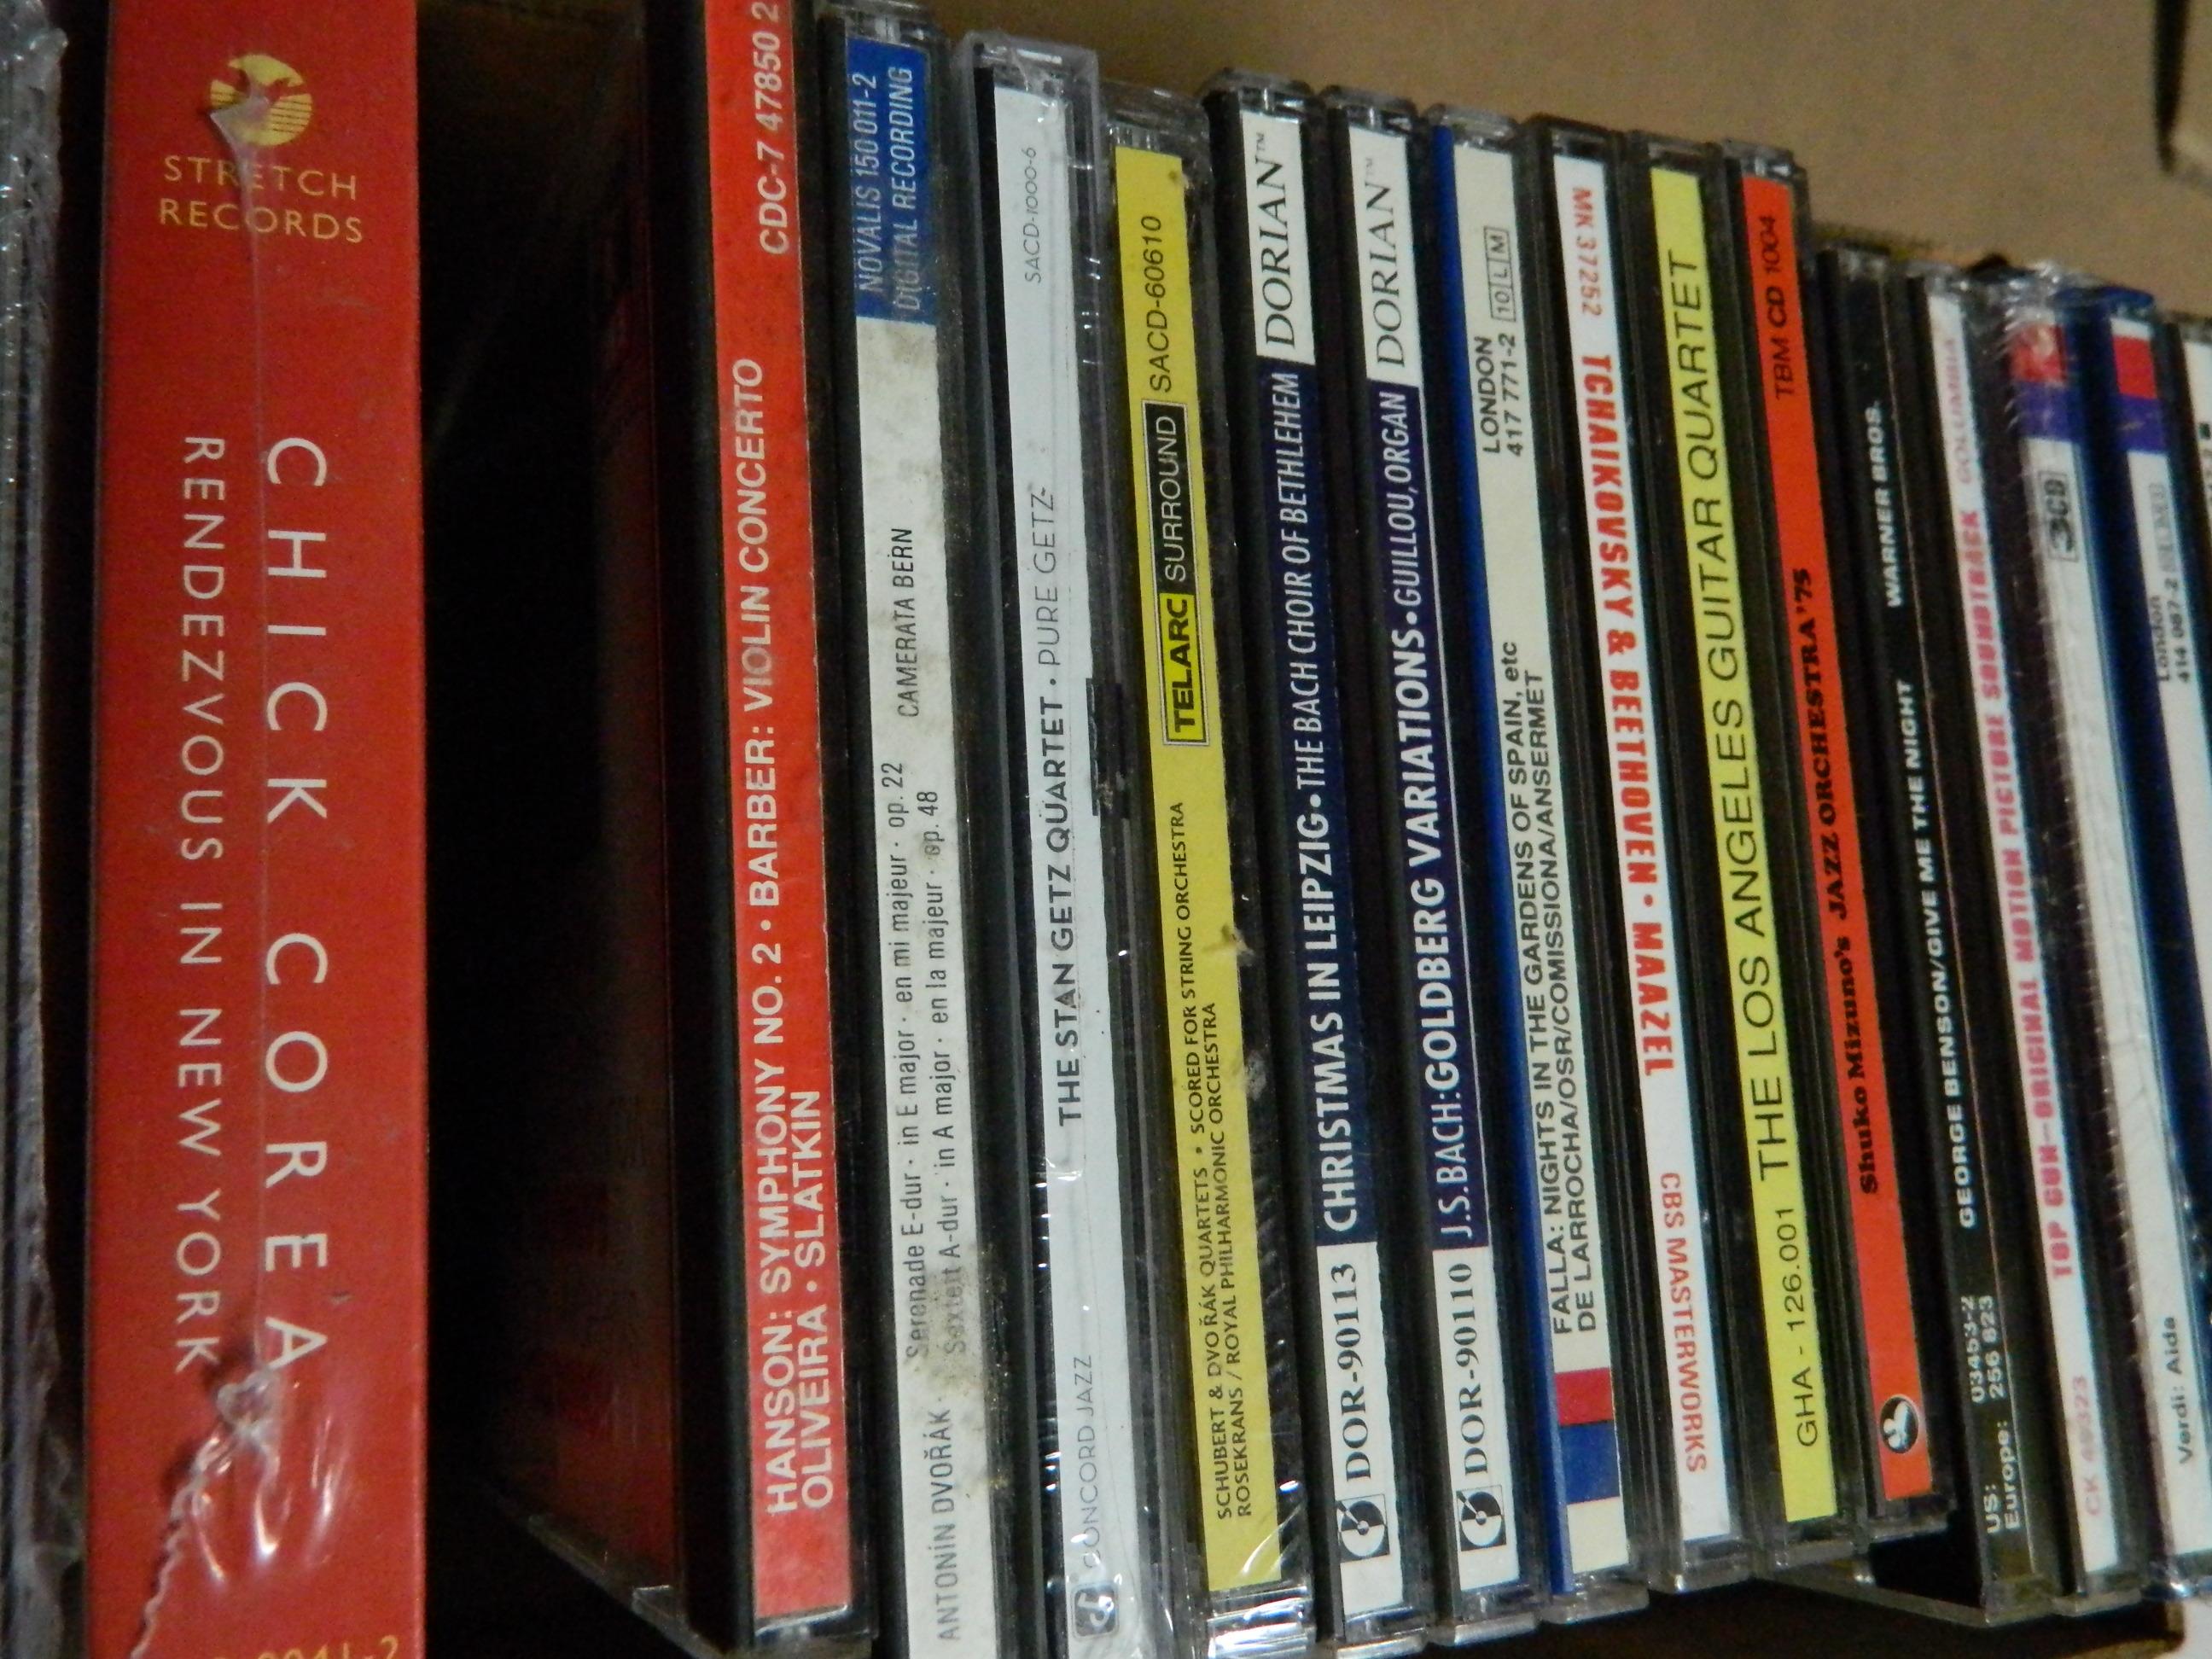 Large Lot of Music CDs - Some Audiophile - Some New - Various Genres